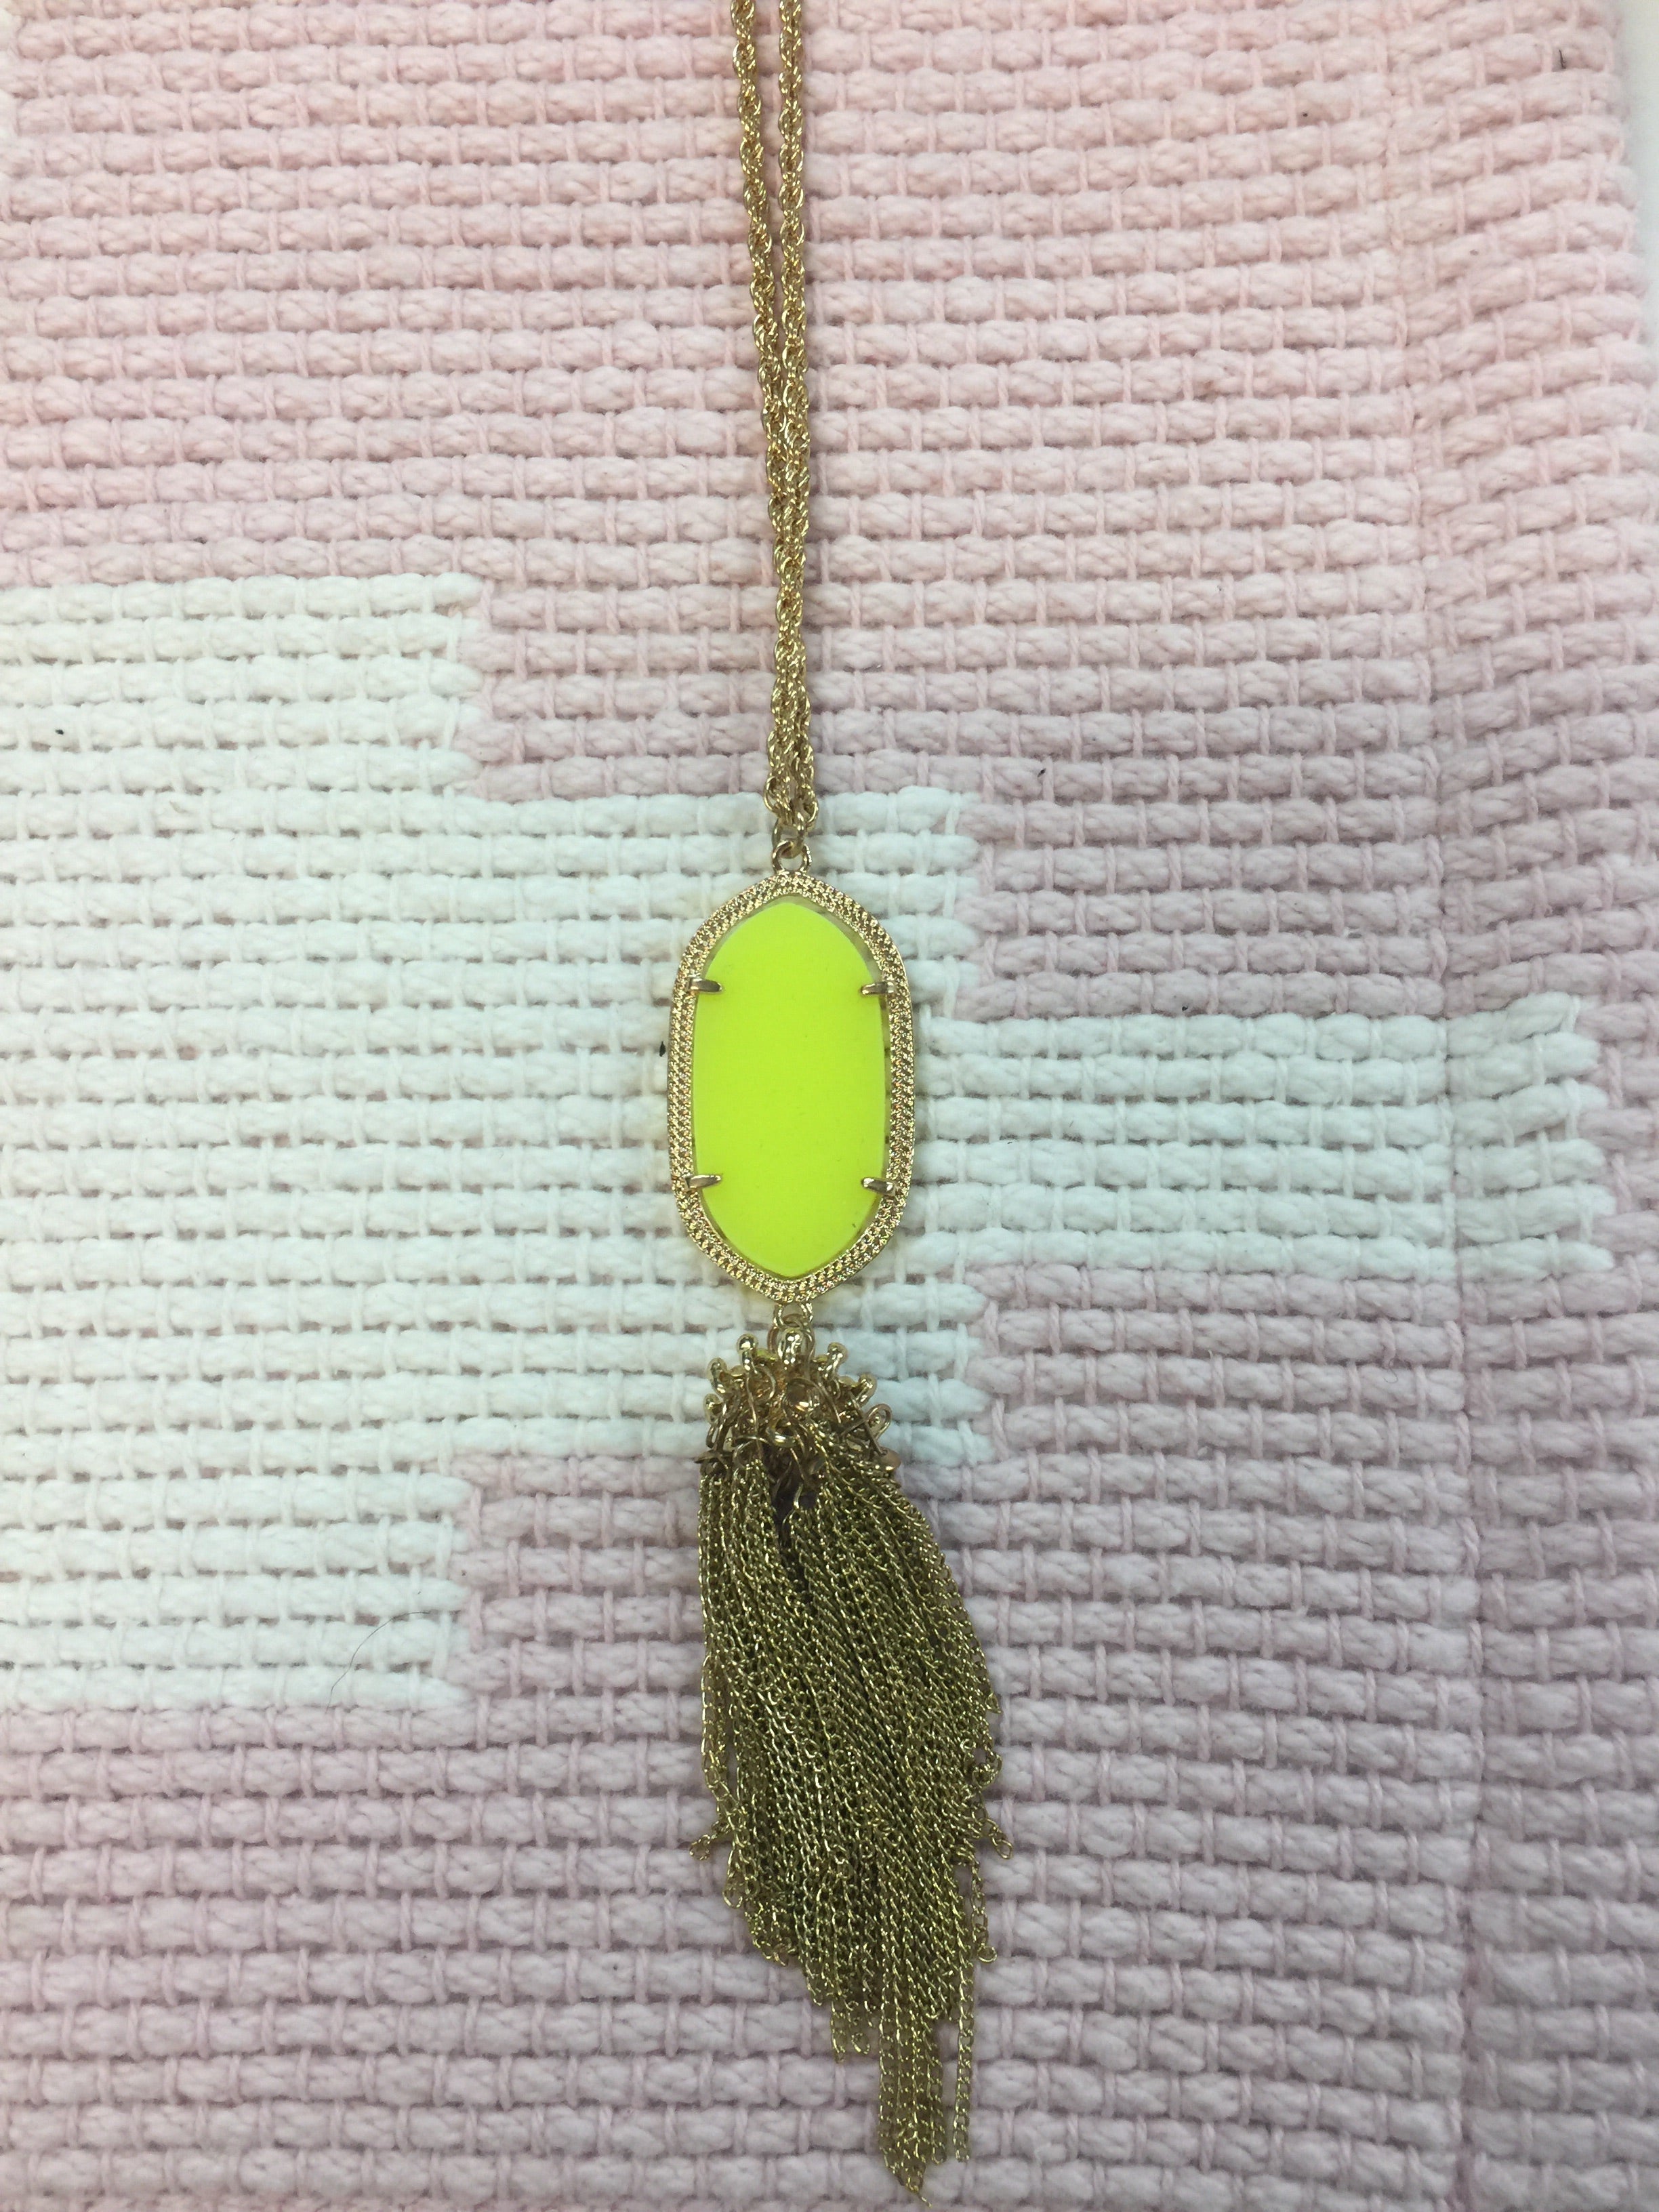 Gold Chain Necklace with Neon Yellow Oval Pendant and Chain Tassel - Giddy Up Glamour Boutique